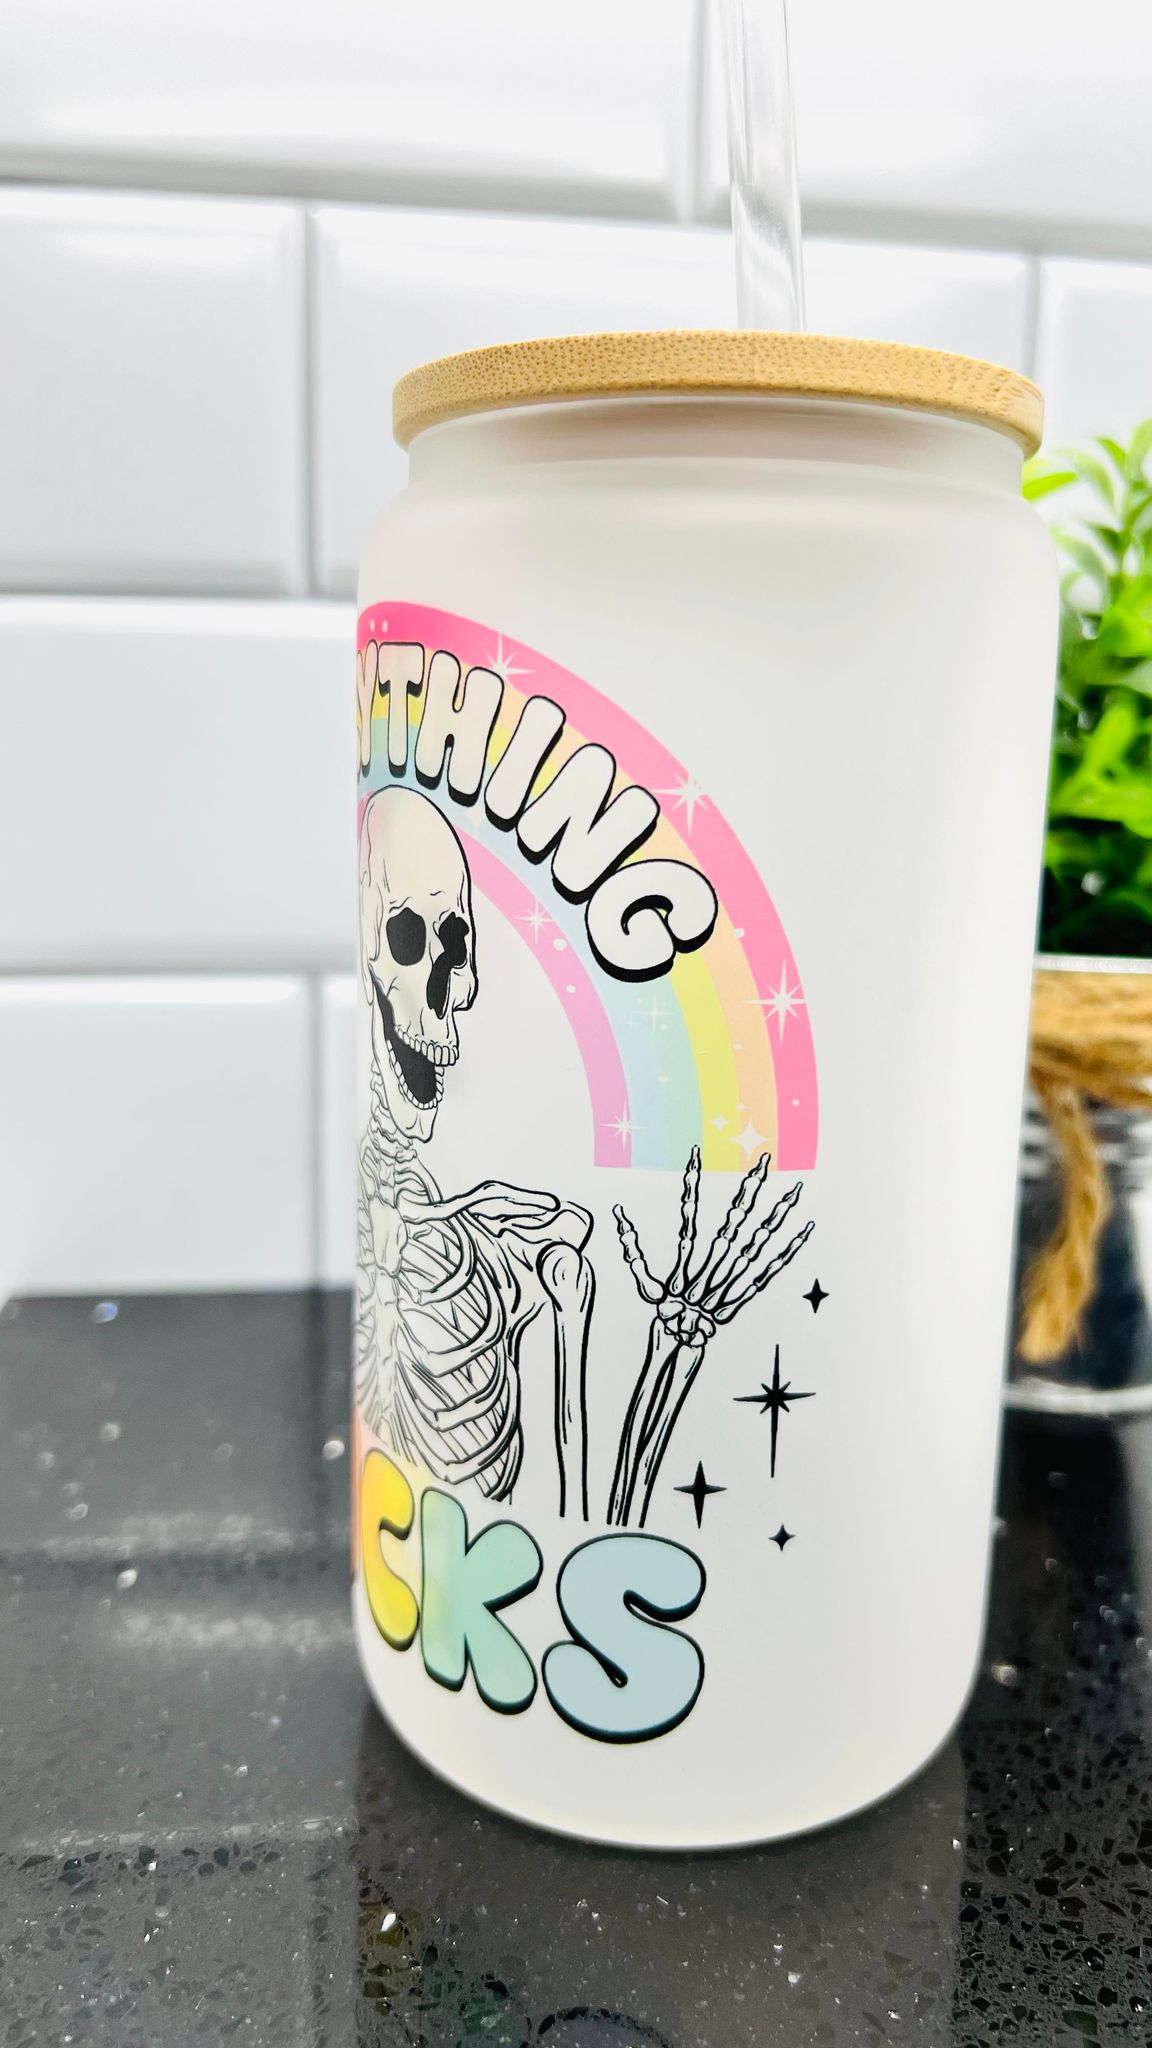 Everything Sucks Rainbow Skeleton 16 ounce Glass Can with Bamboo Lid